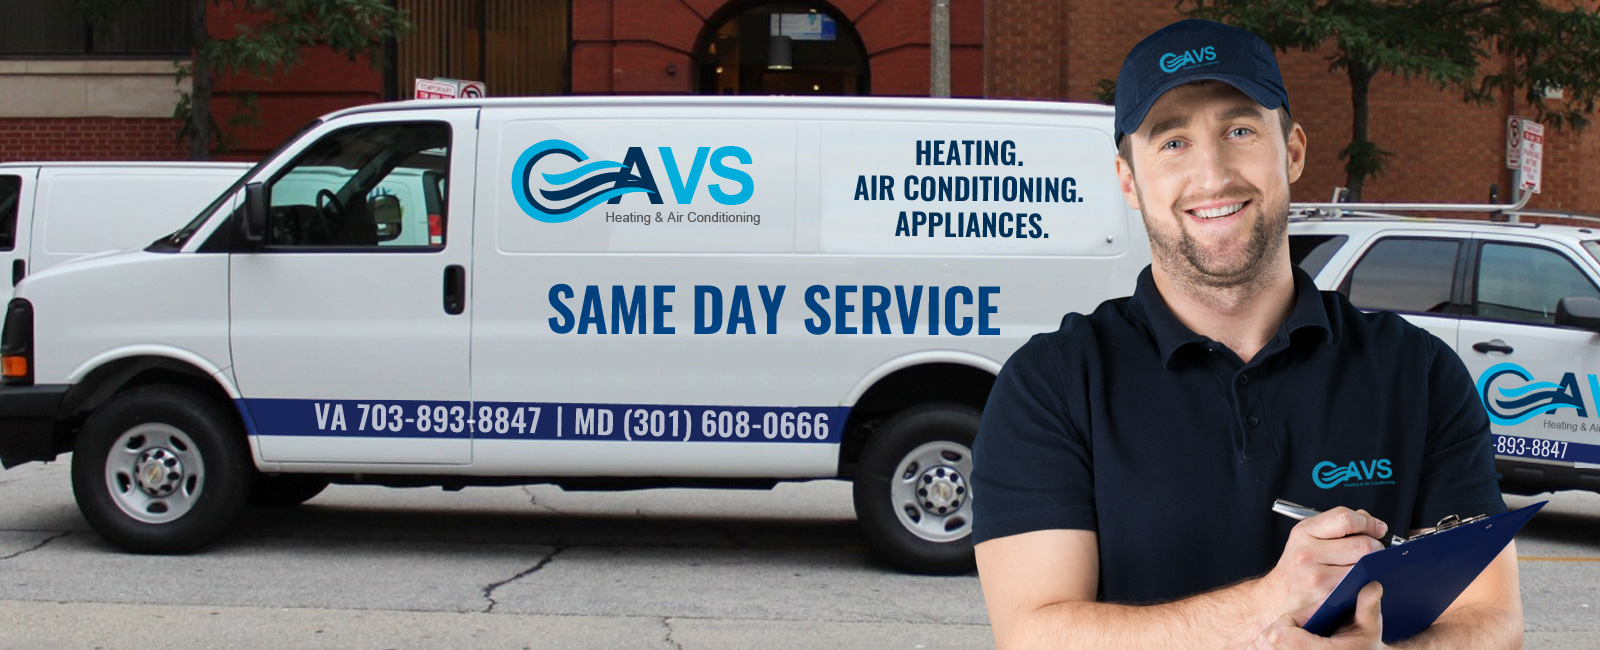 Gainesville HVAC Contractor | Heating System, Heat Pump, Fireplace and AC Installation & Repair service